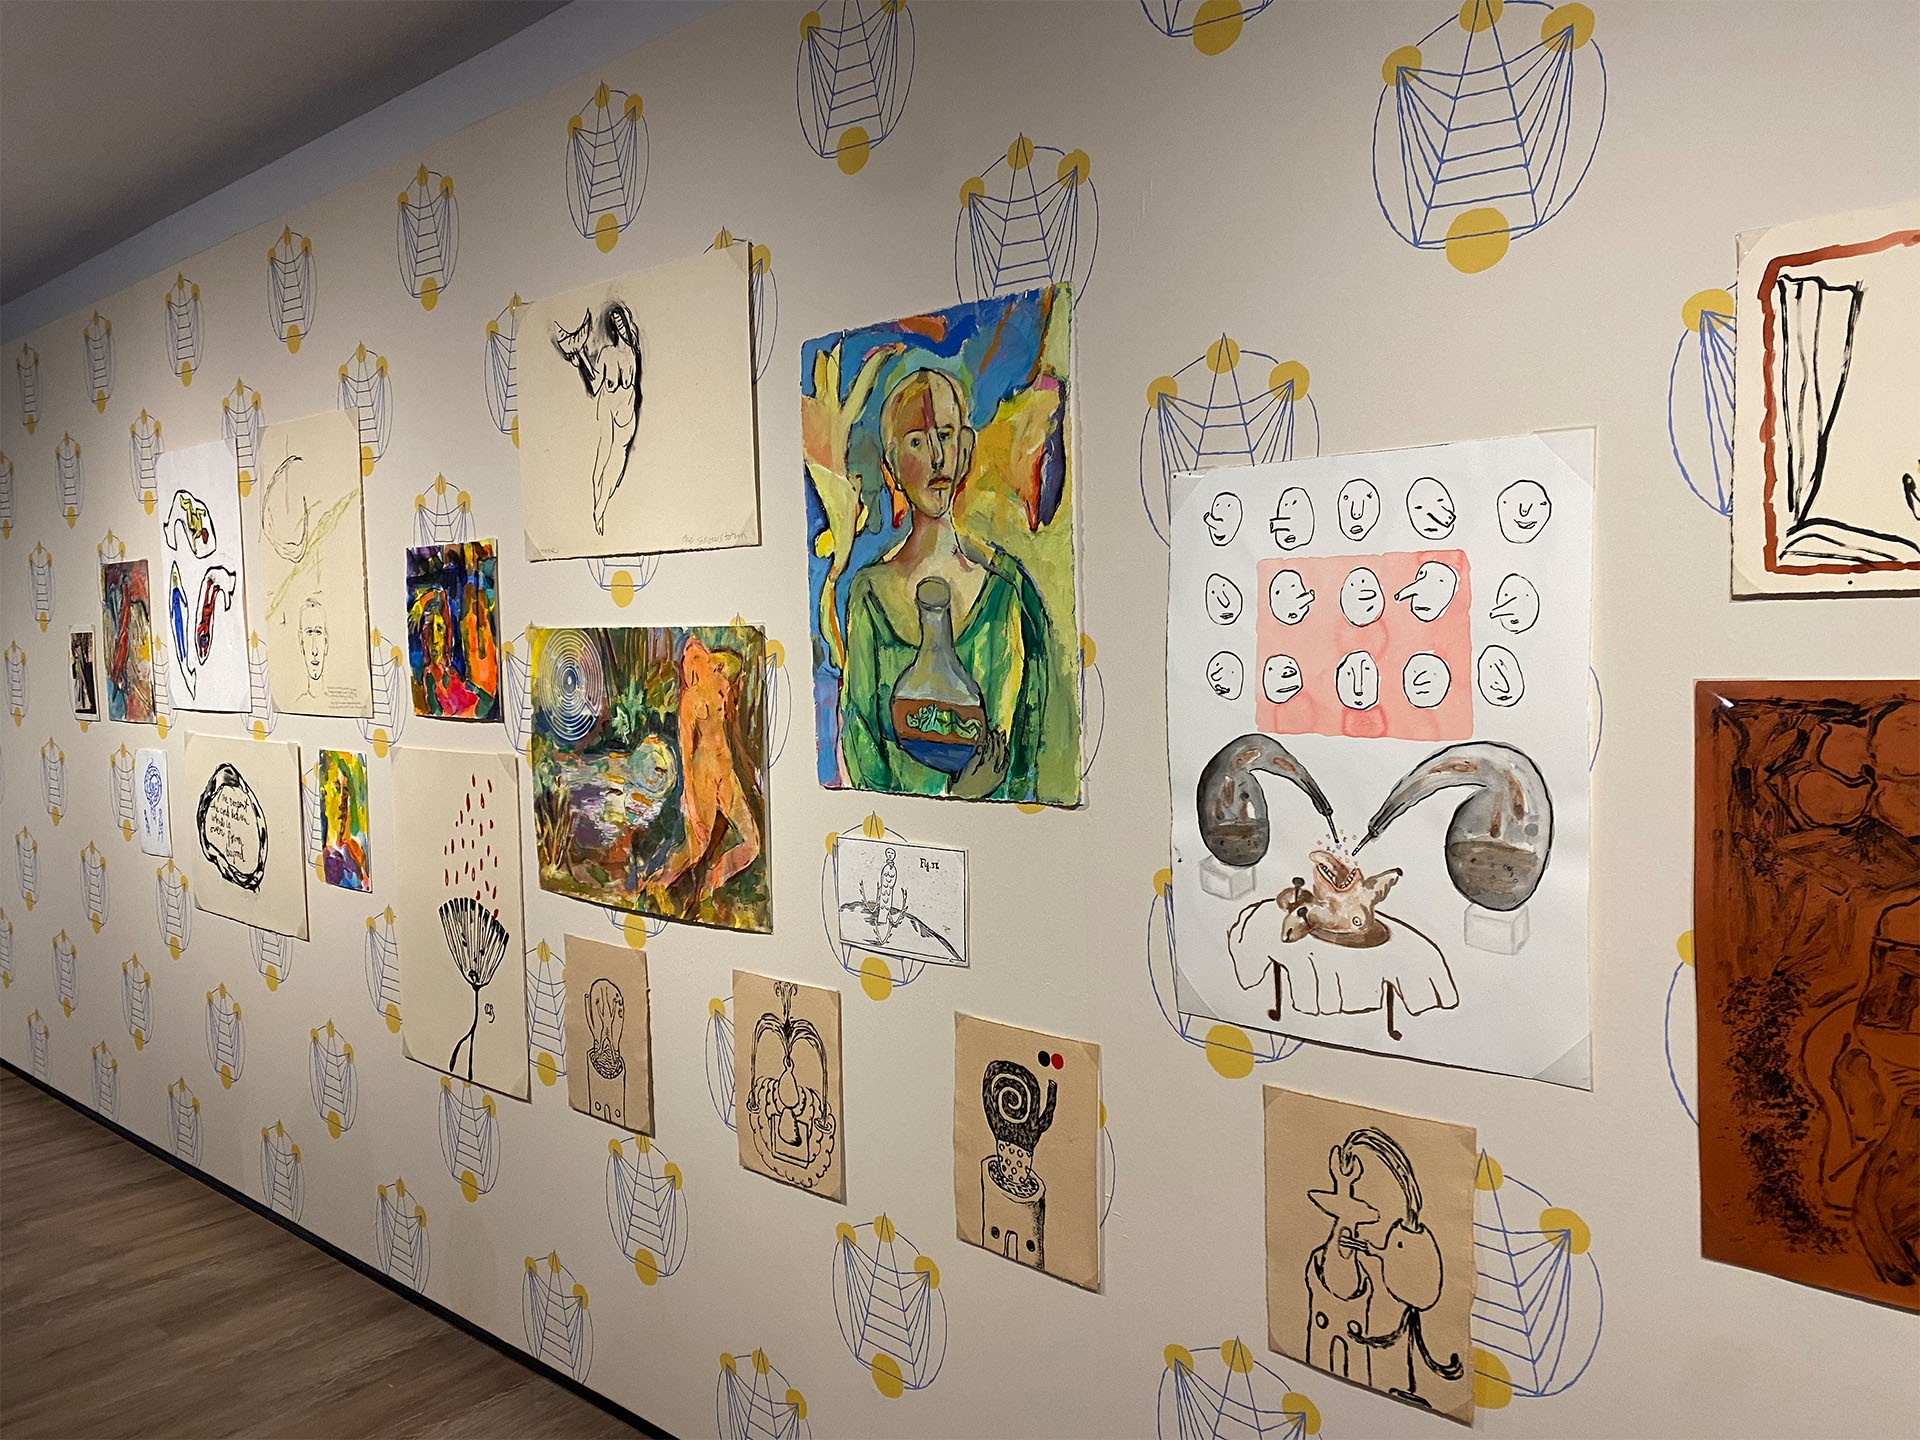 Image of an art exhibit displayed within the AQ of the SFU Burnaby campus